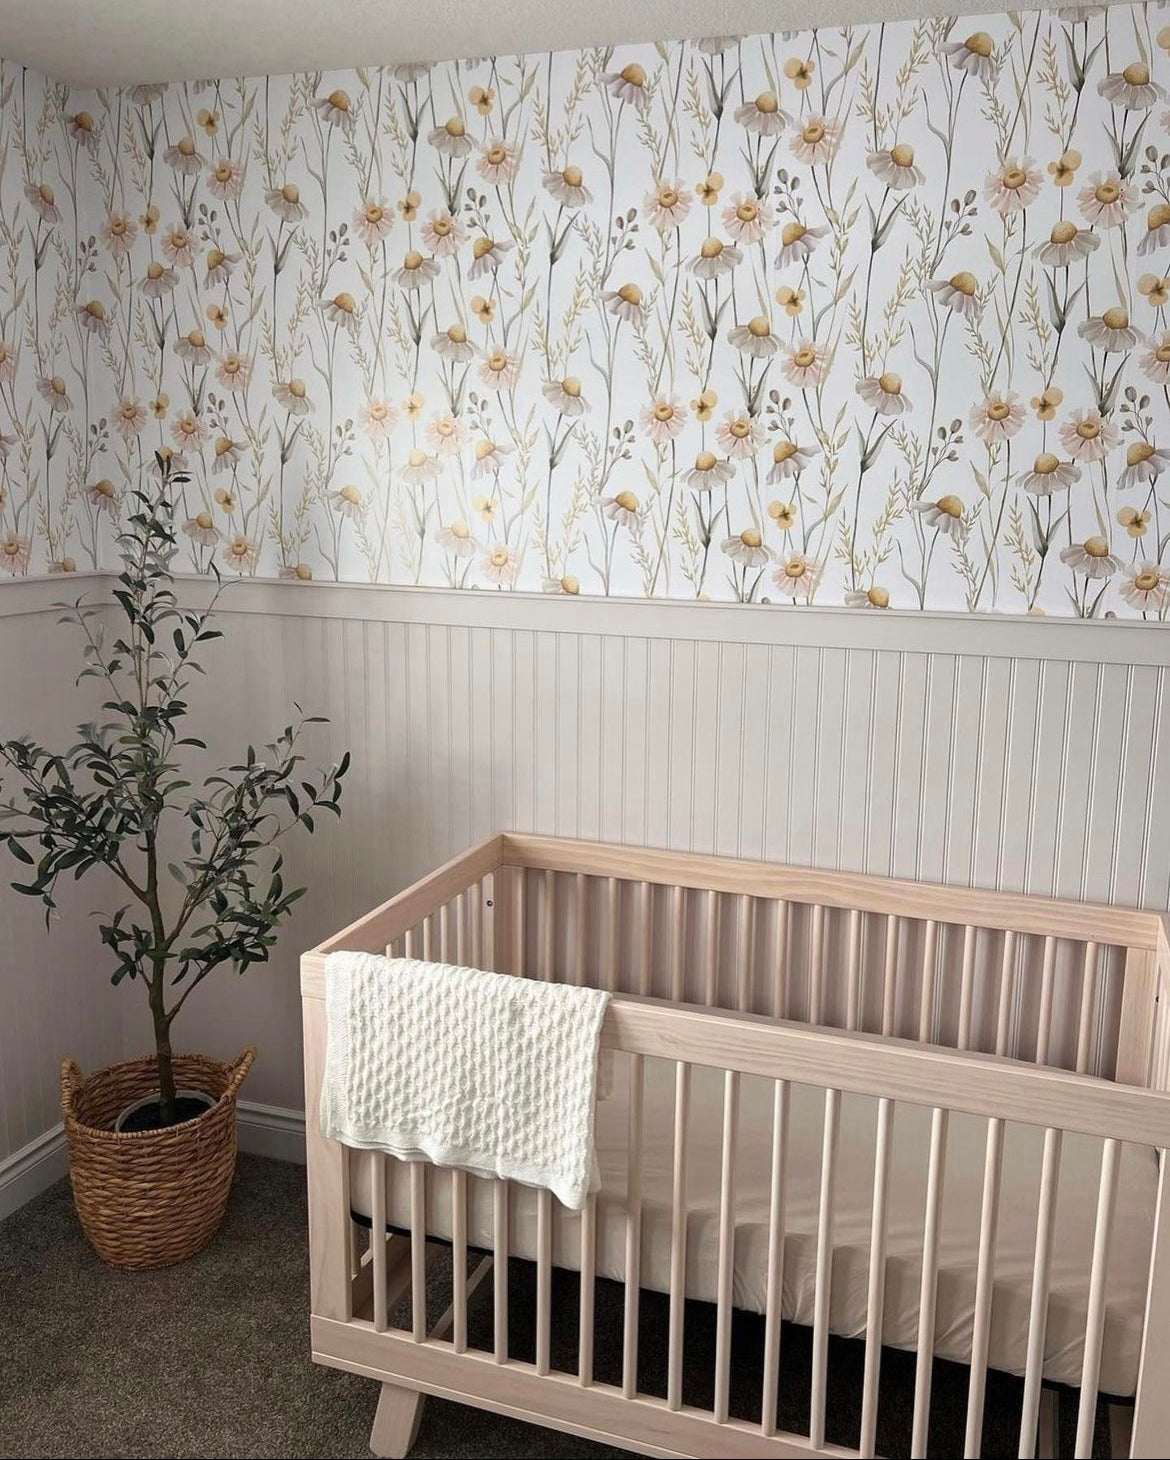 Nursery Makeover with Peel and Stick Wallpaper